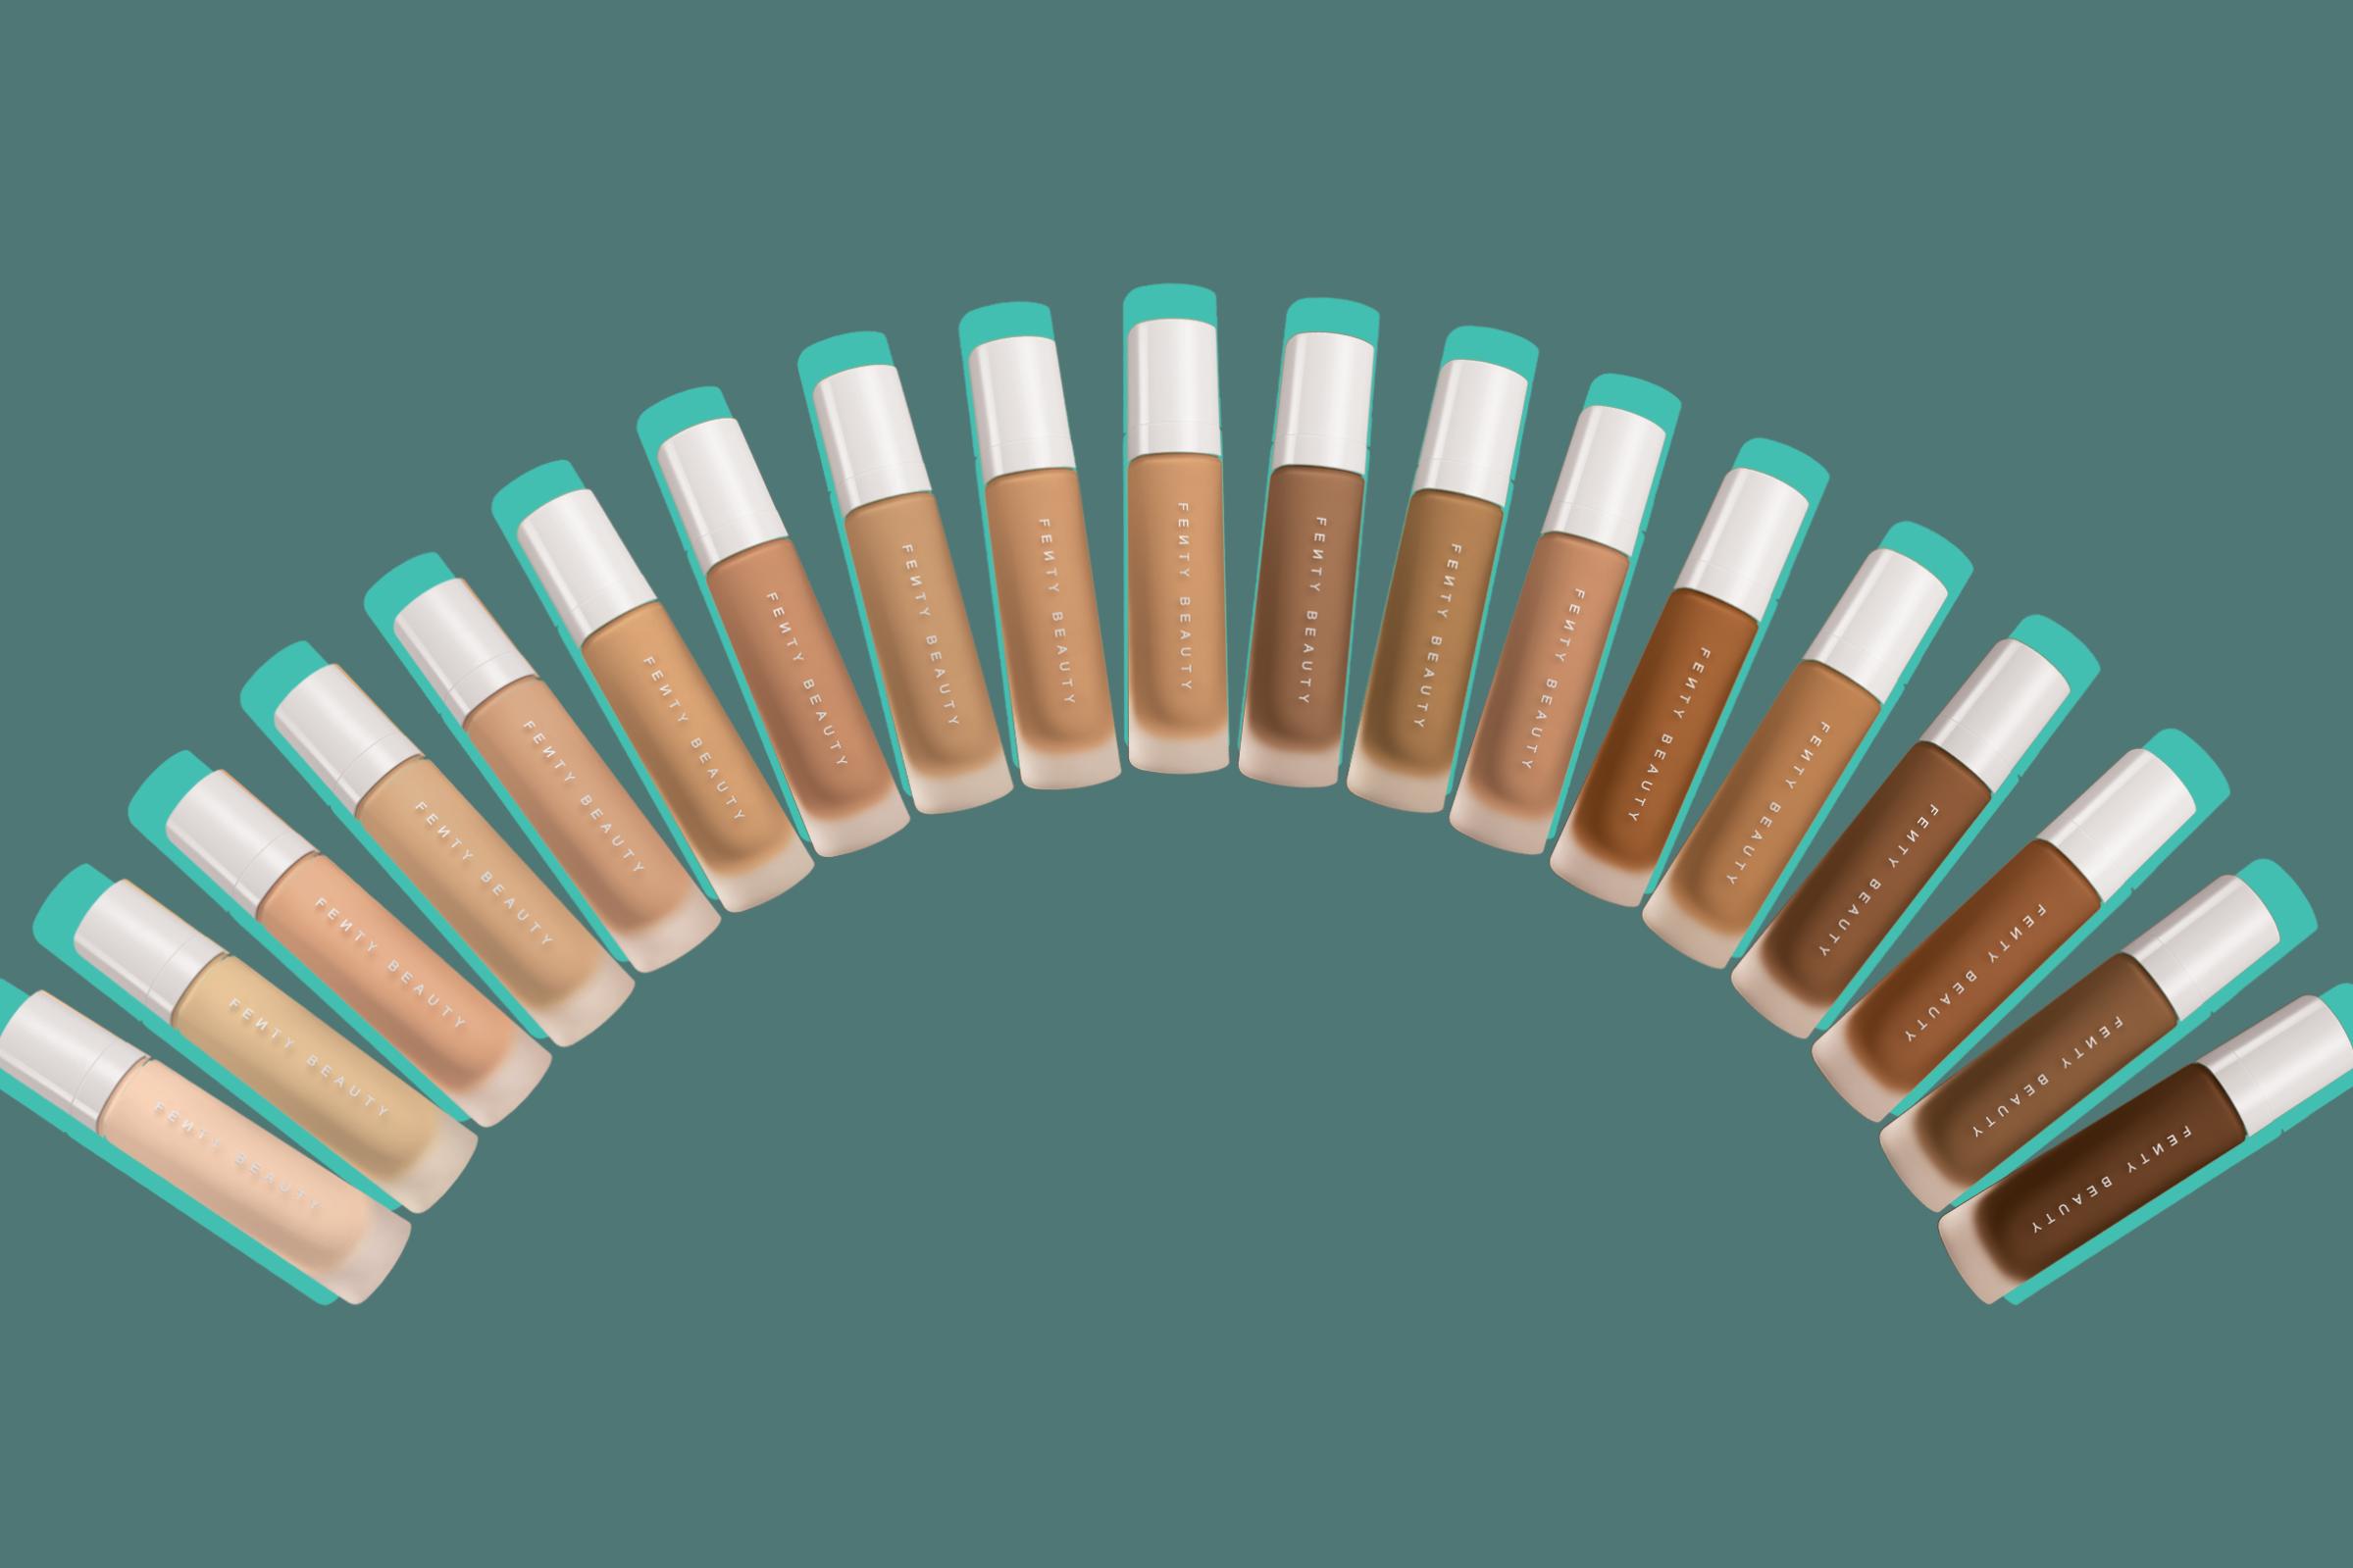 Fenty Beauty is one of the best inventions of 2017